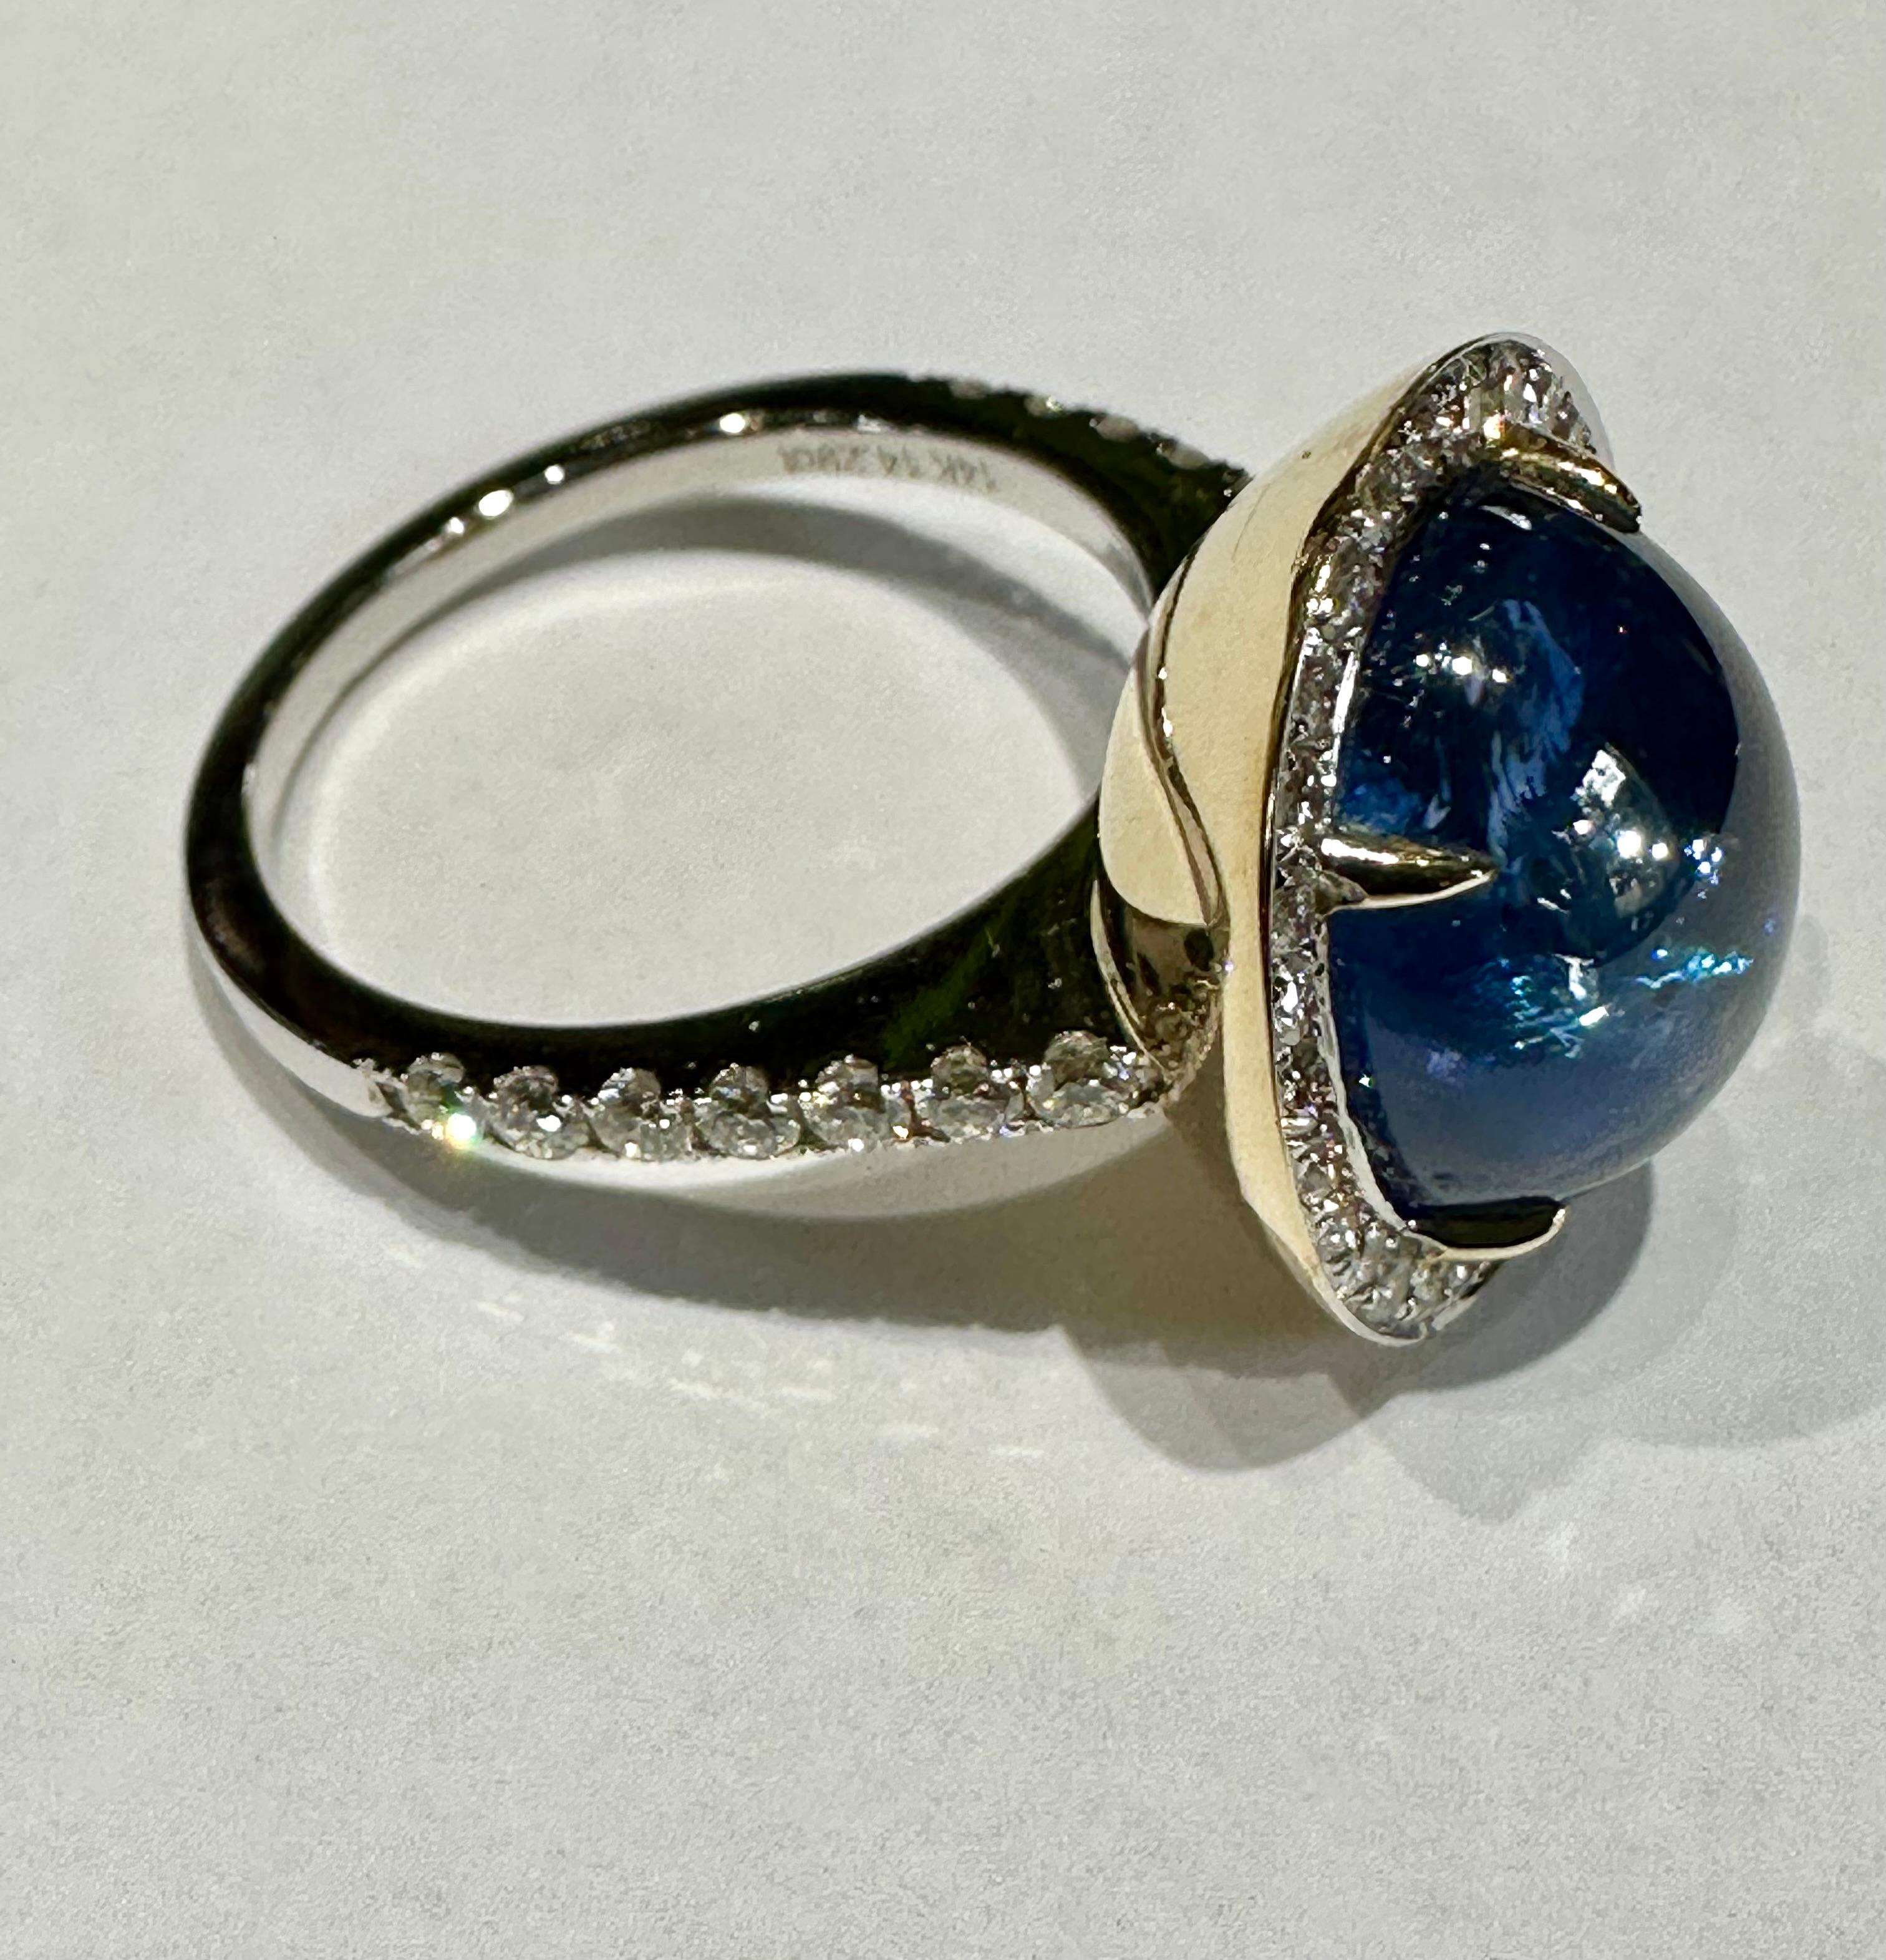 Large Cabochon Tanzanite and Diamond Ladies Ring 14.29 CT, Diamonds 0.66 CT. 14K Y/W Gold



Description / Condition: New. All jewelry has been professionally scrutinized and cleaned prior to being offered for sale. 

Manufacturer: Custom made by A